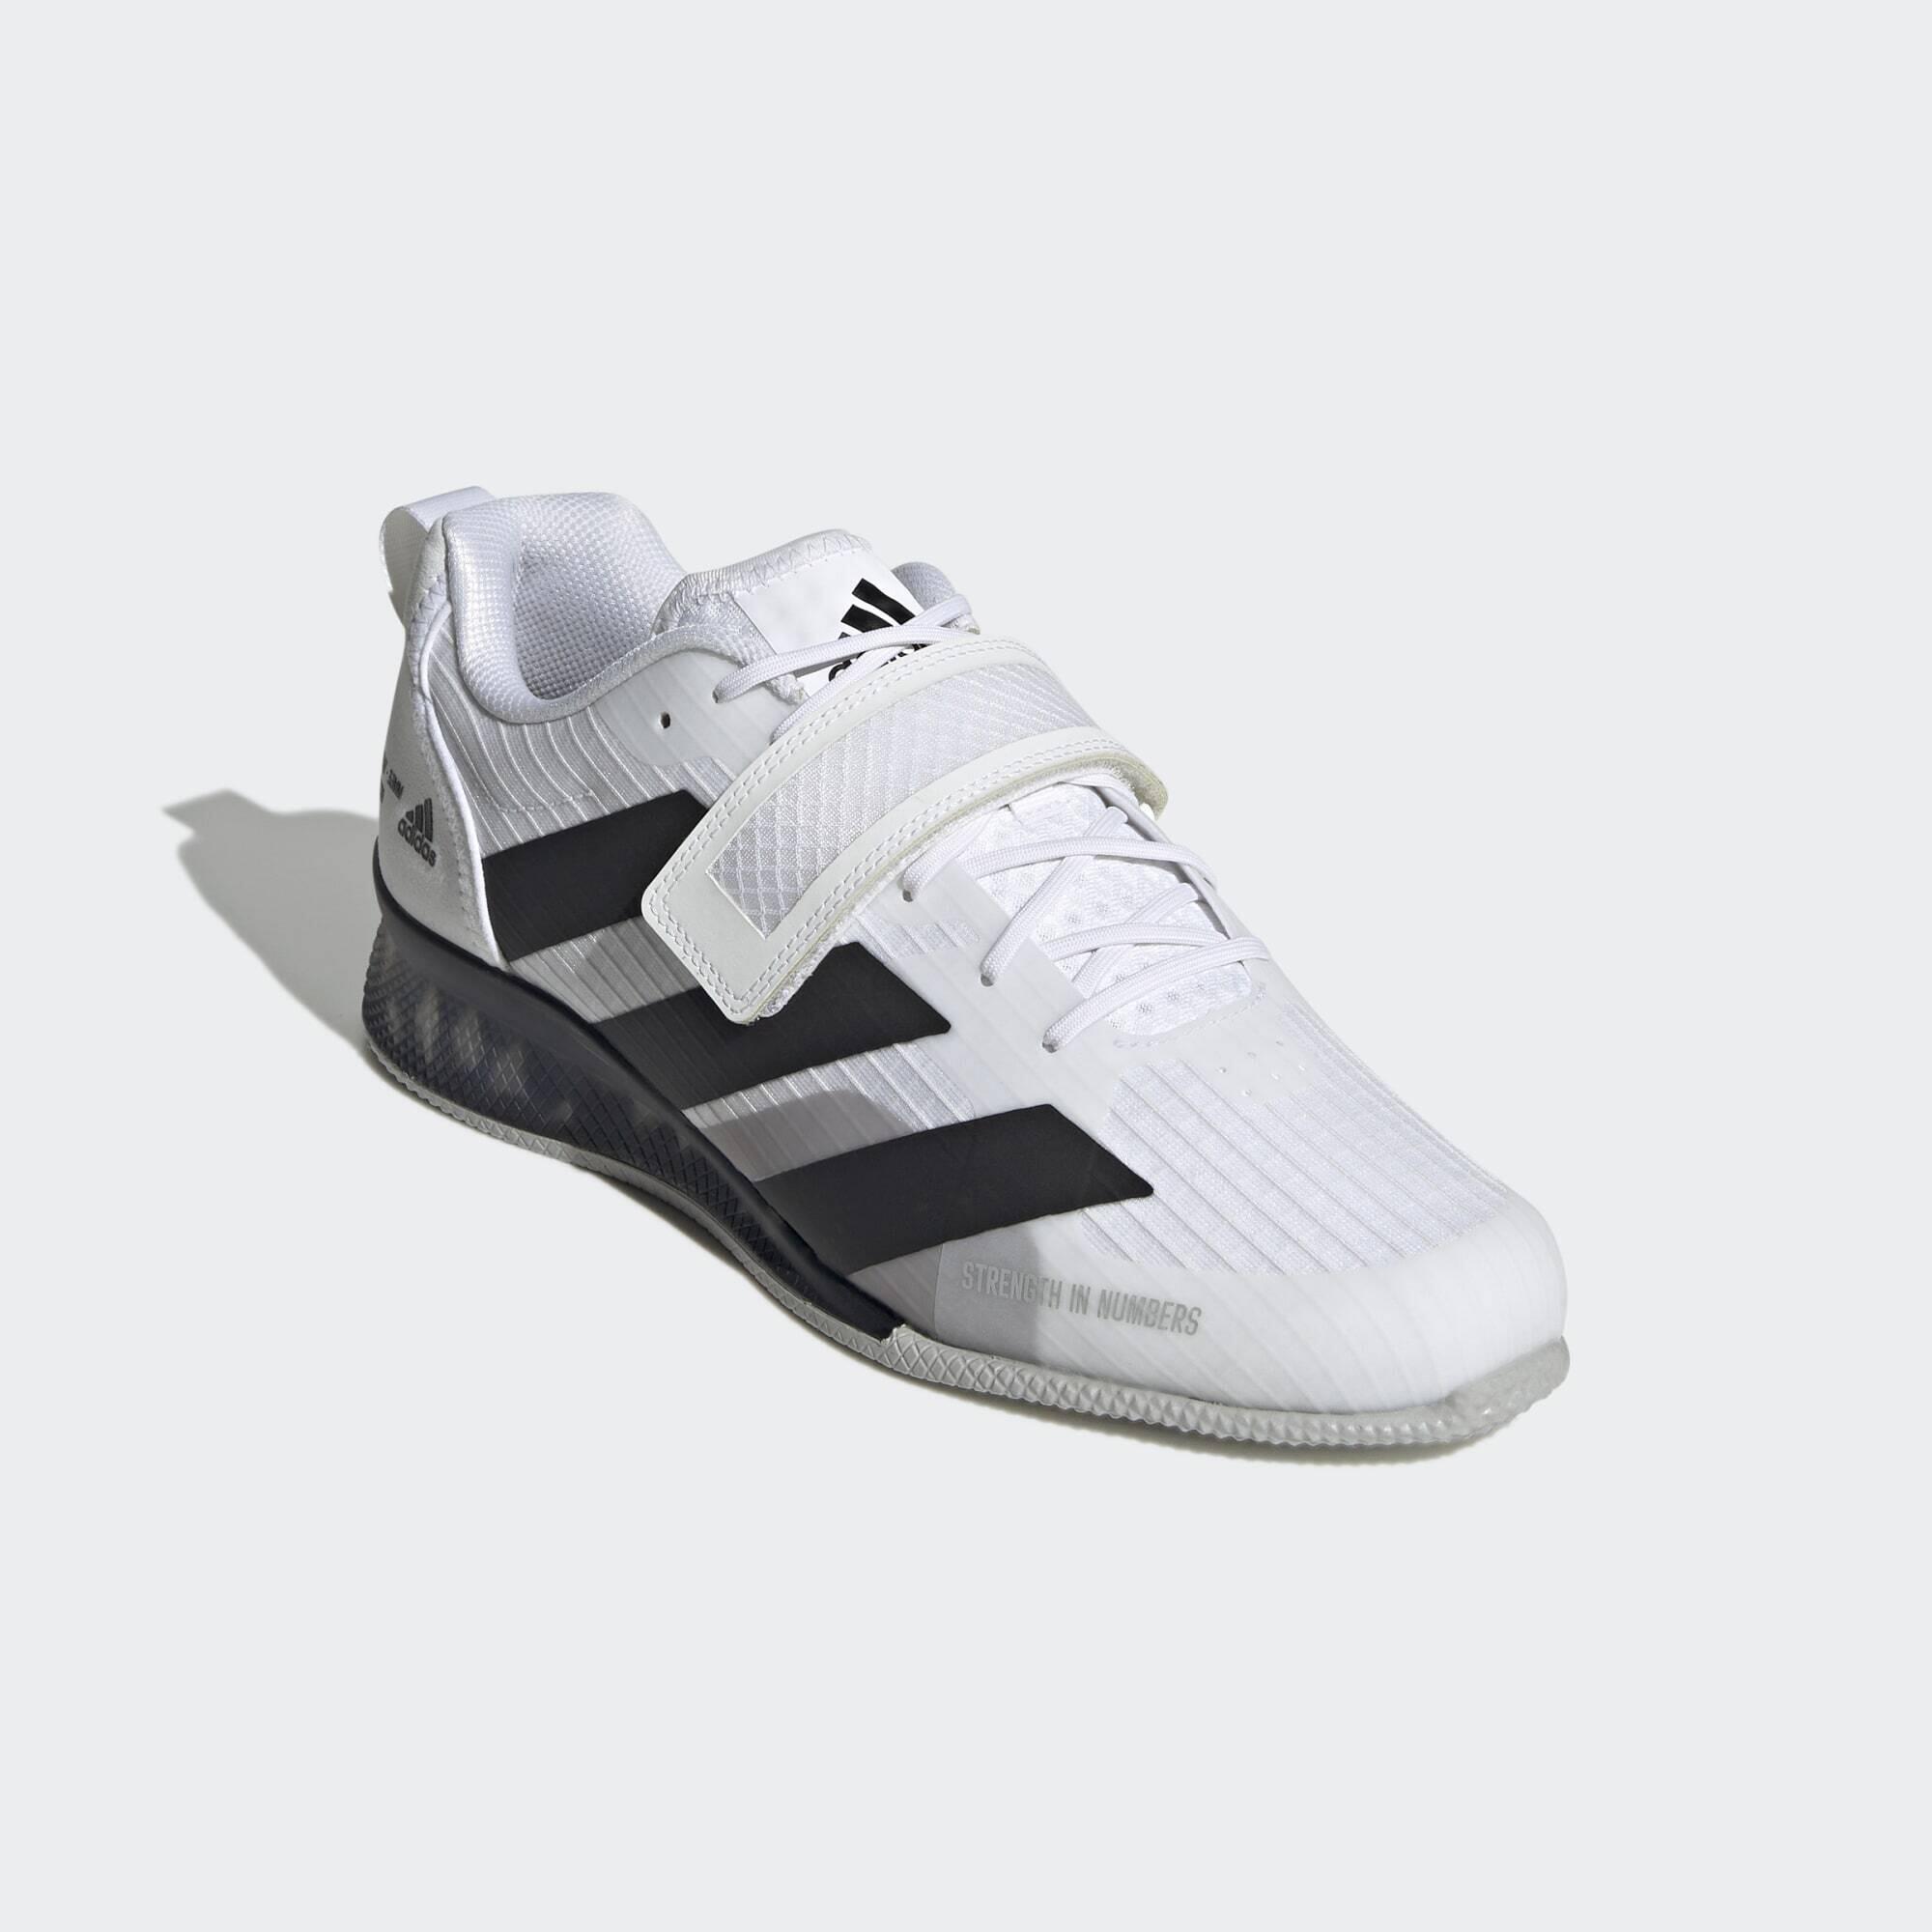 Adipower Weightlifting 3 Shoes 5/7